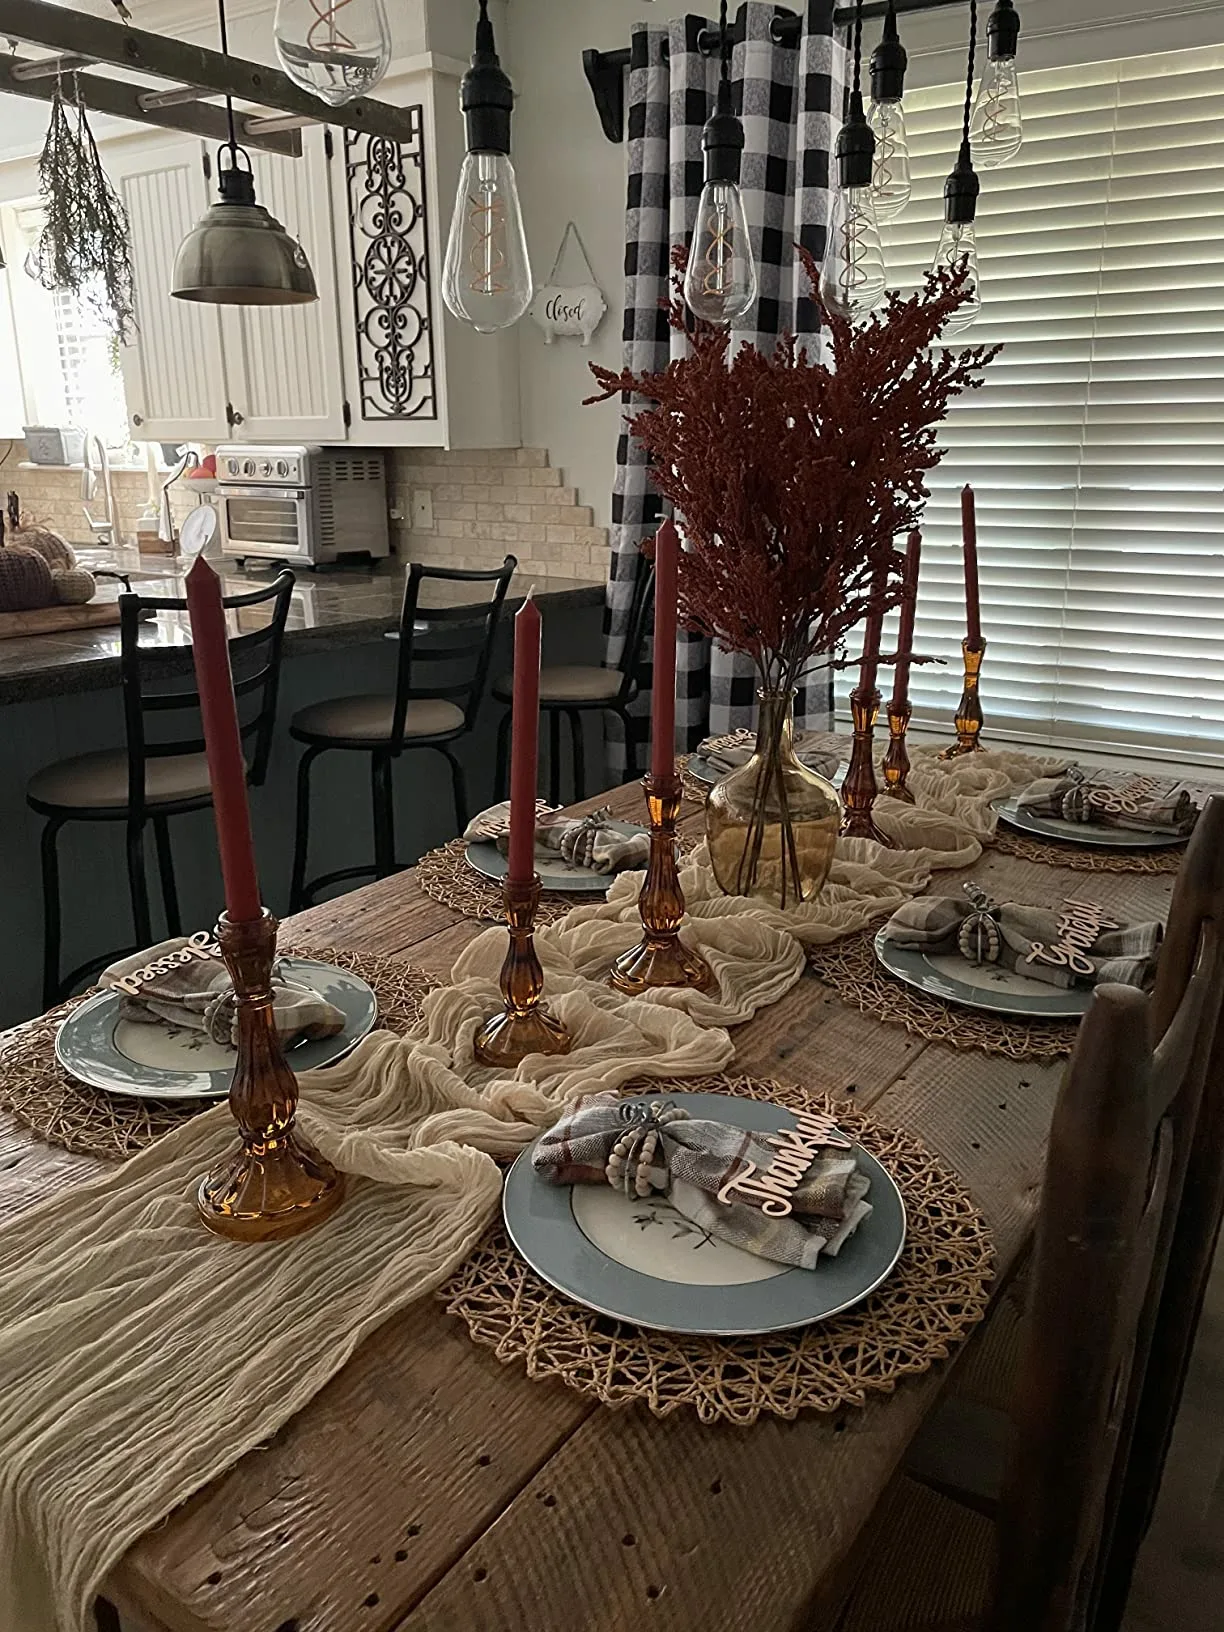 White Tablerunner Cheesecloth Red Candlesticks Clear Glass Flower Vase Wooden Table Angleview Kitchen Dining Table